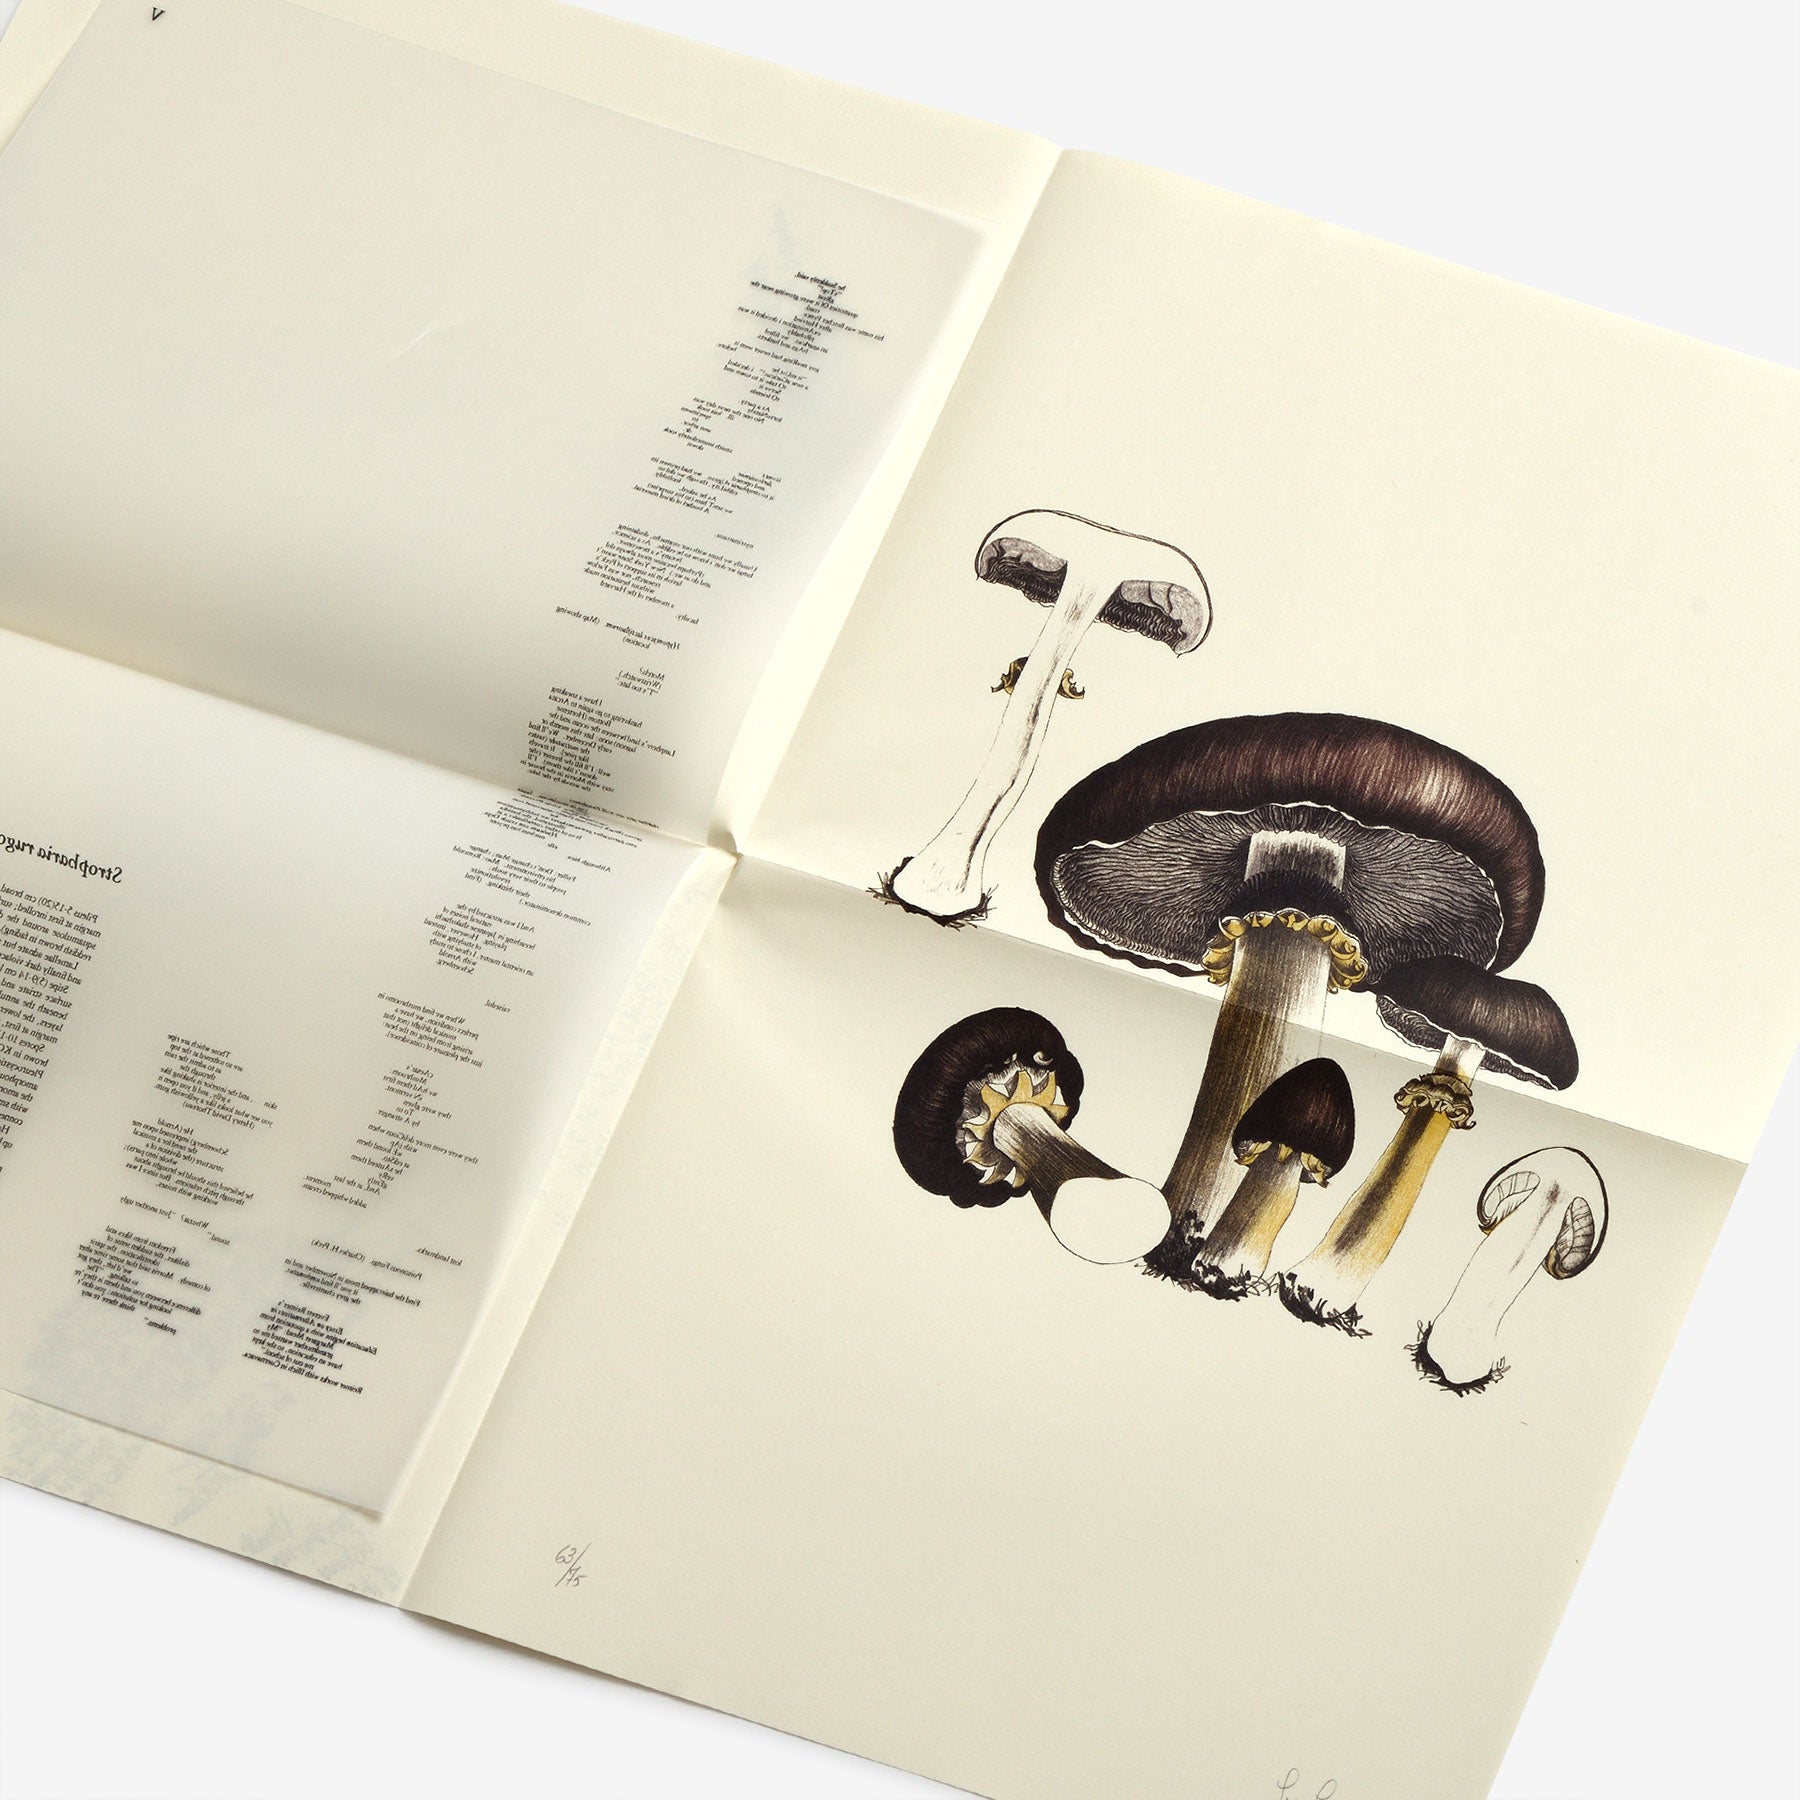 Type: A Visual History of Typefaces 2冊組-catalogo